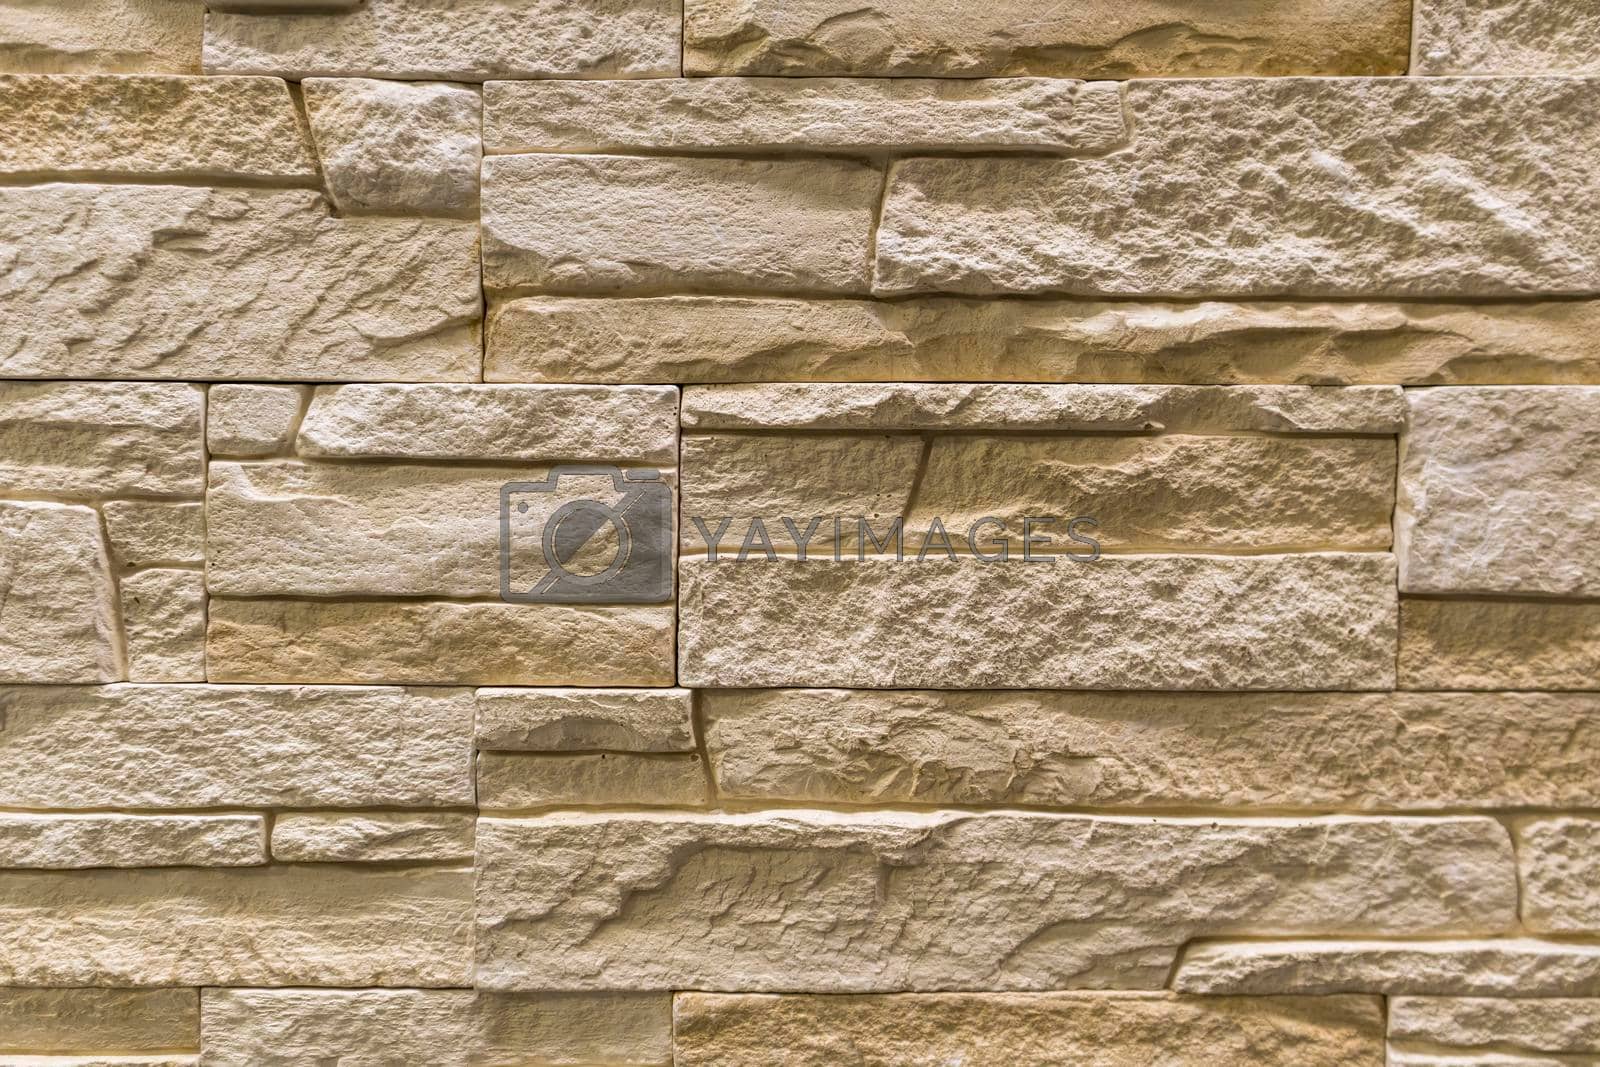 Royalty free image of masonry wall paving stones as a background close up by roman112007